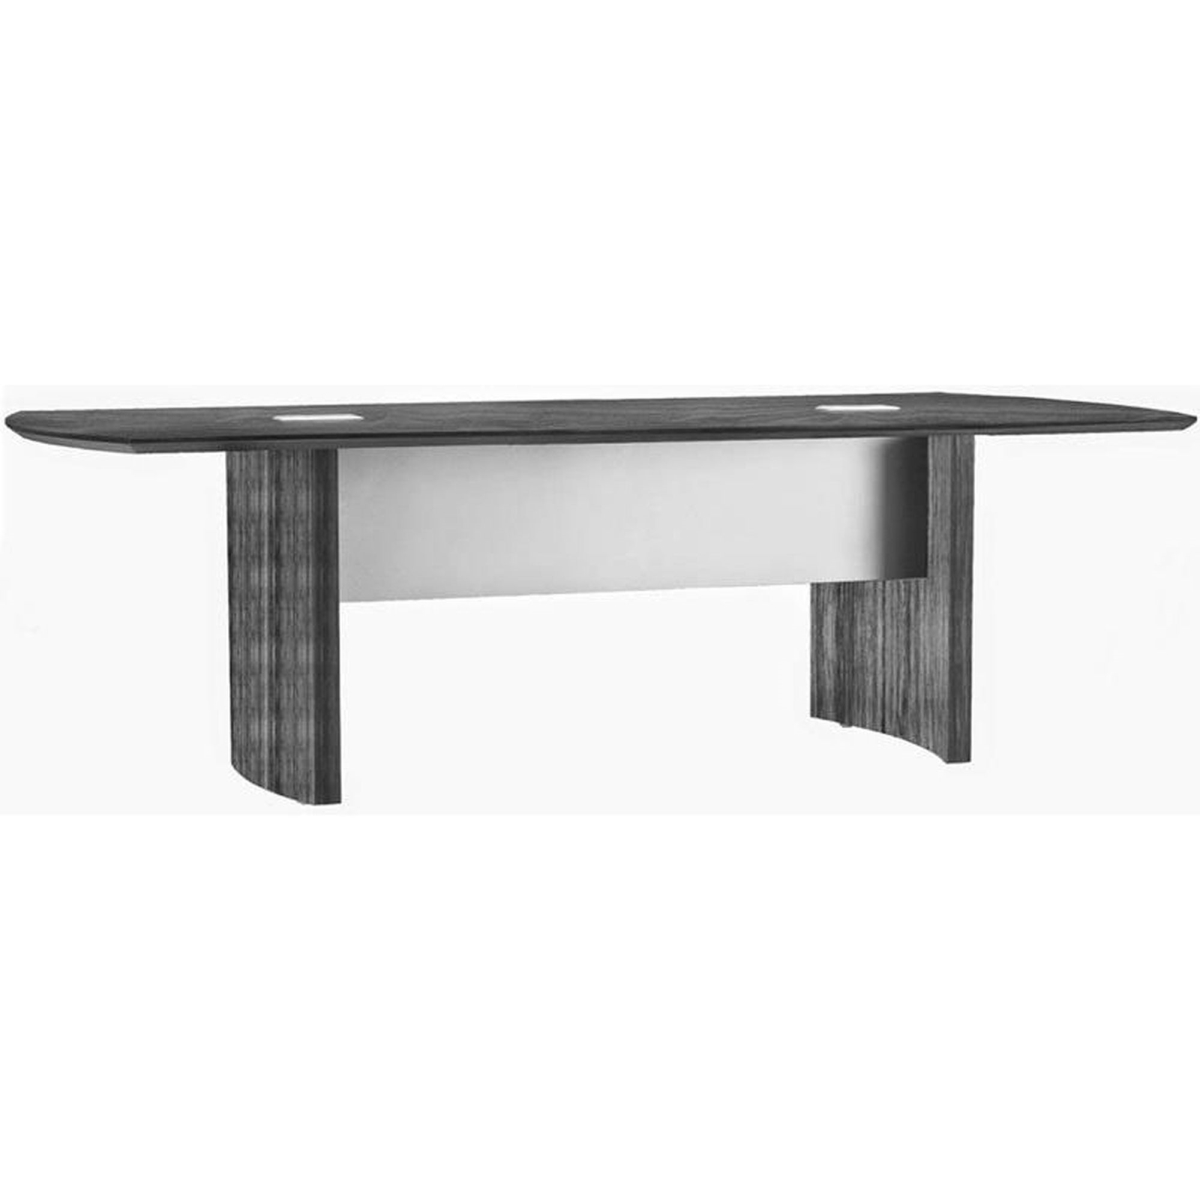 Mnc8lgs 8 Ft. Medina Conference Table - Laminate Gray Steel - 29.5 X 96 X 42 In.